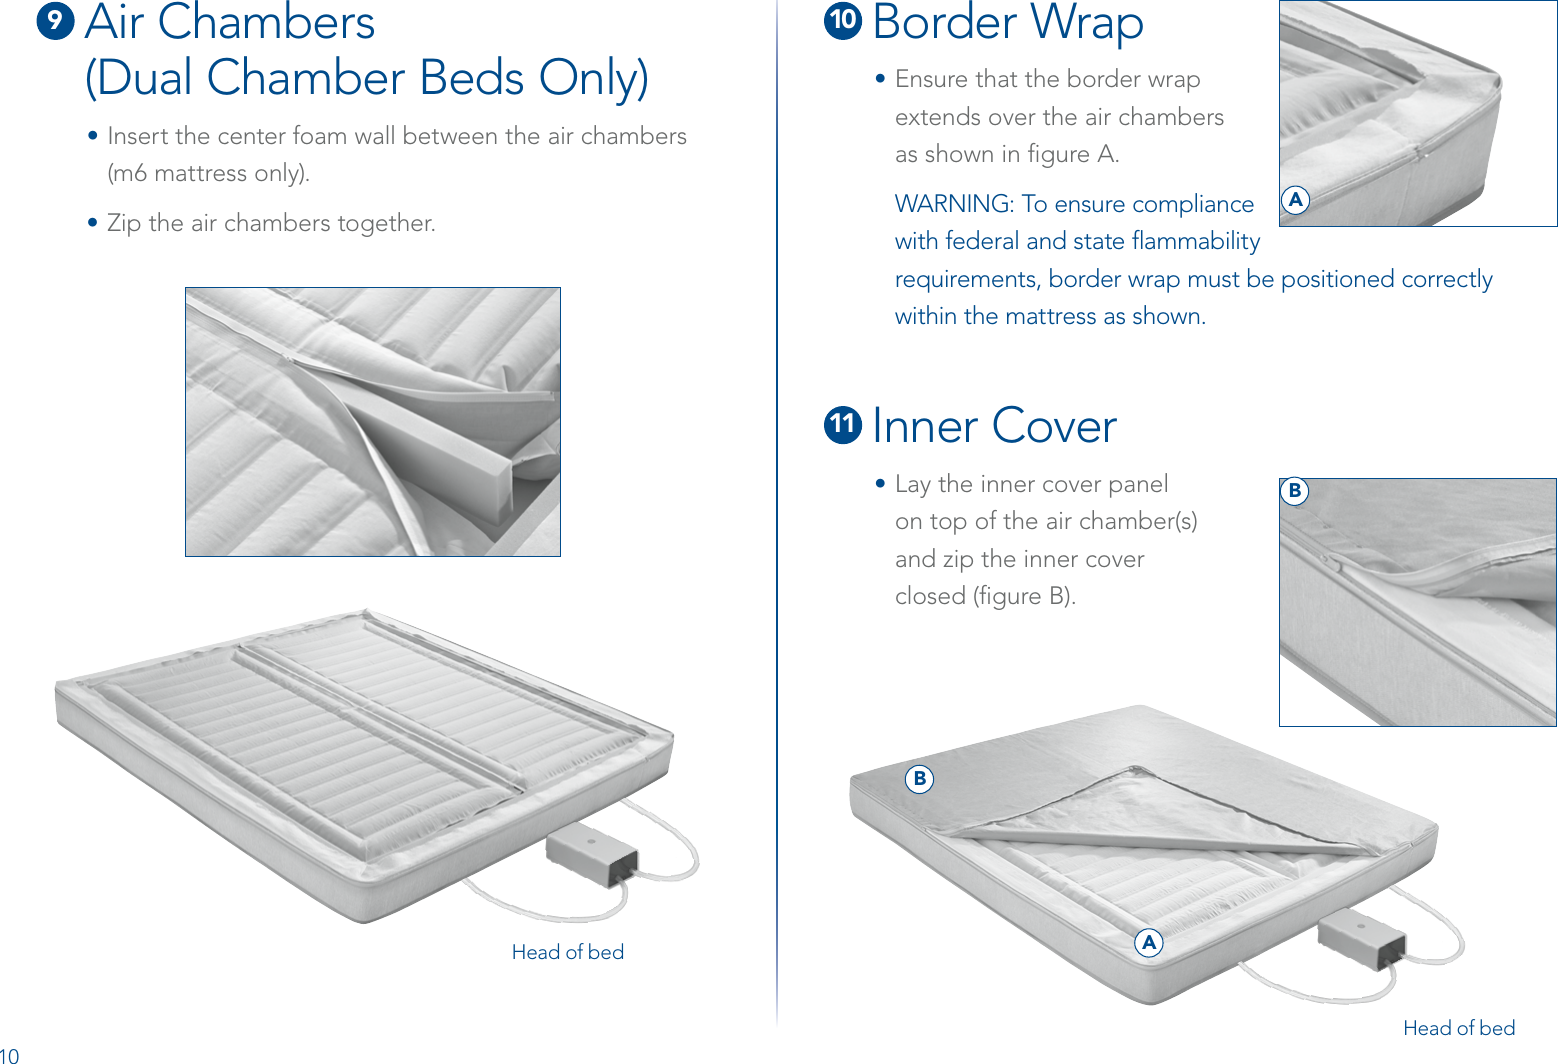 9 Air Chambers    (Dual Chamber Beds Only)• Insert the center foam wall between the air chambers  (m6 mattress only).• Zip the air chambers together.10  Border Wrap•  Ensure that the border wrap  extends over the air chambers  as shown in ﬁgure A.WARNING: To ensure compliance with federal and state ﬂammability requirements, border wrap must be positioned correctly within the mattress as shown.11  Inner Cover•  Lay the inner cover panel  on top of the air chamber(s)  and zip the inner cover  closed (ﬁgure B).BAABHead of bedHead of bed10